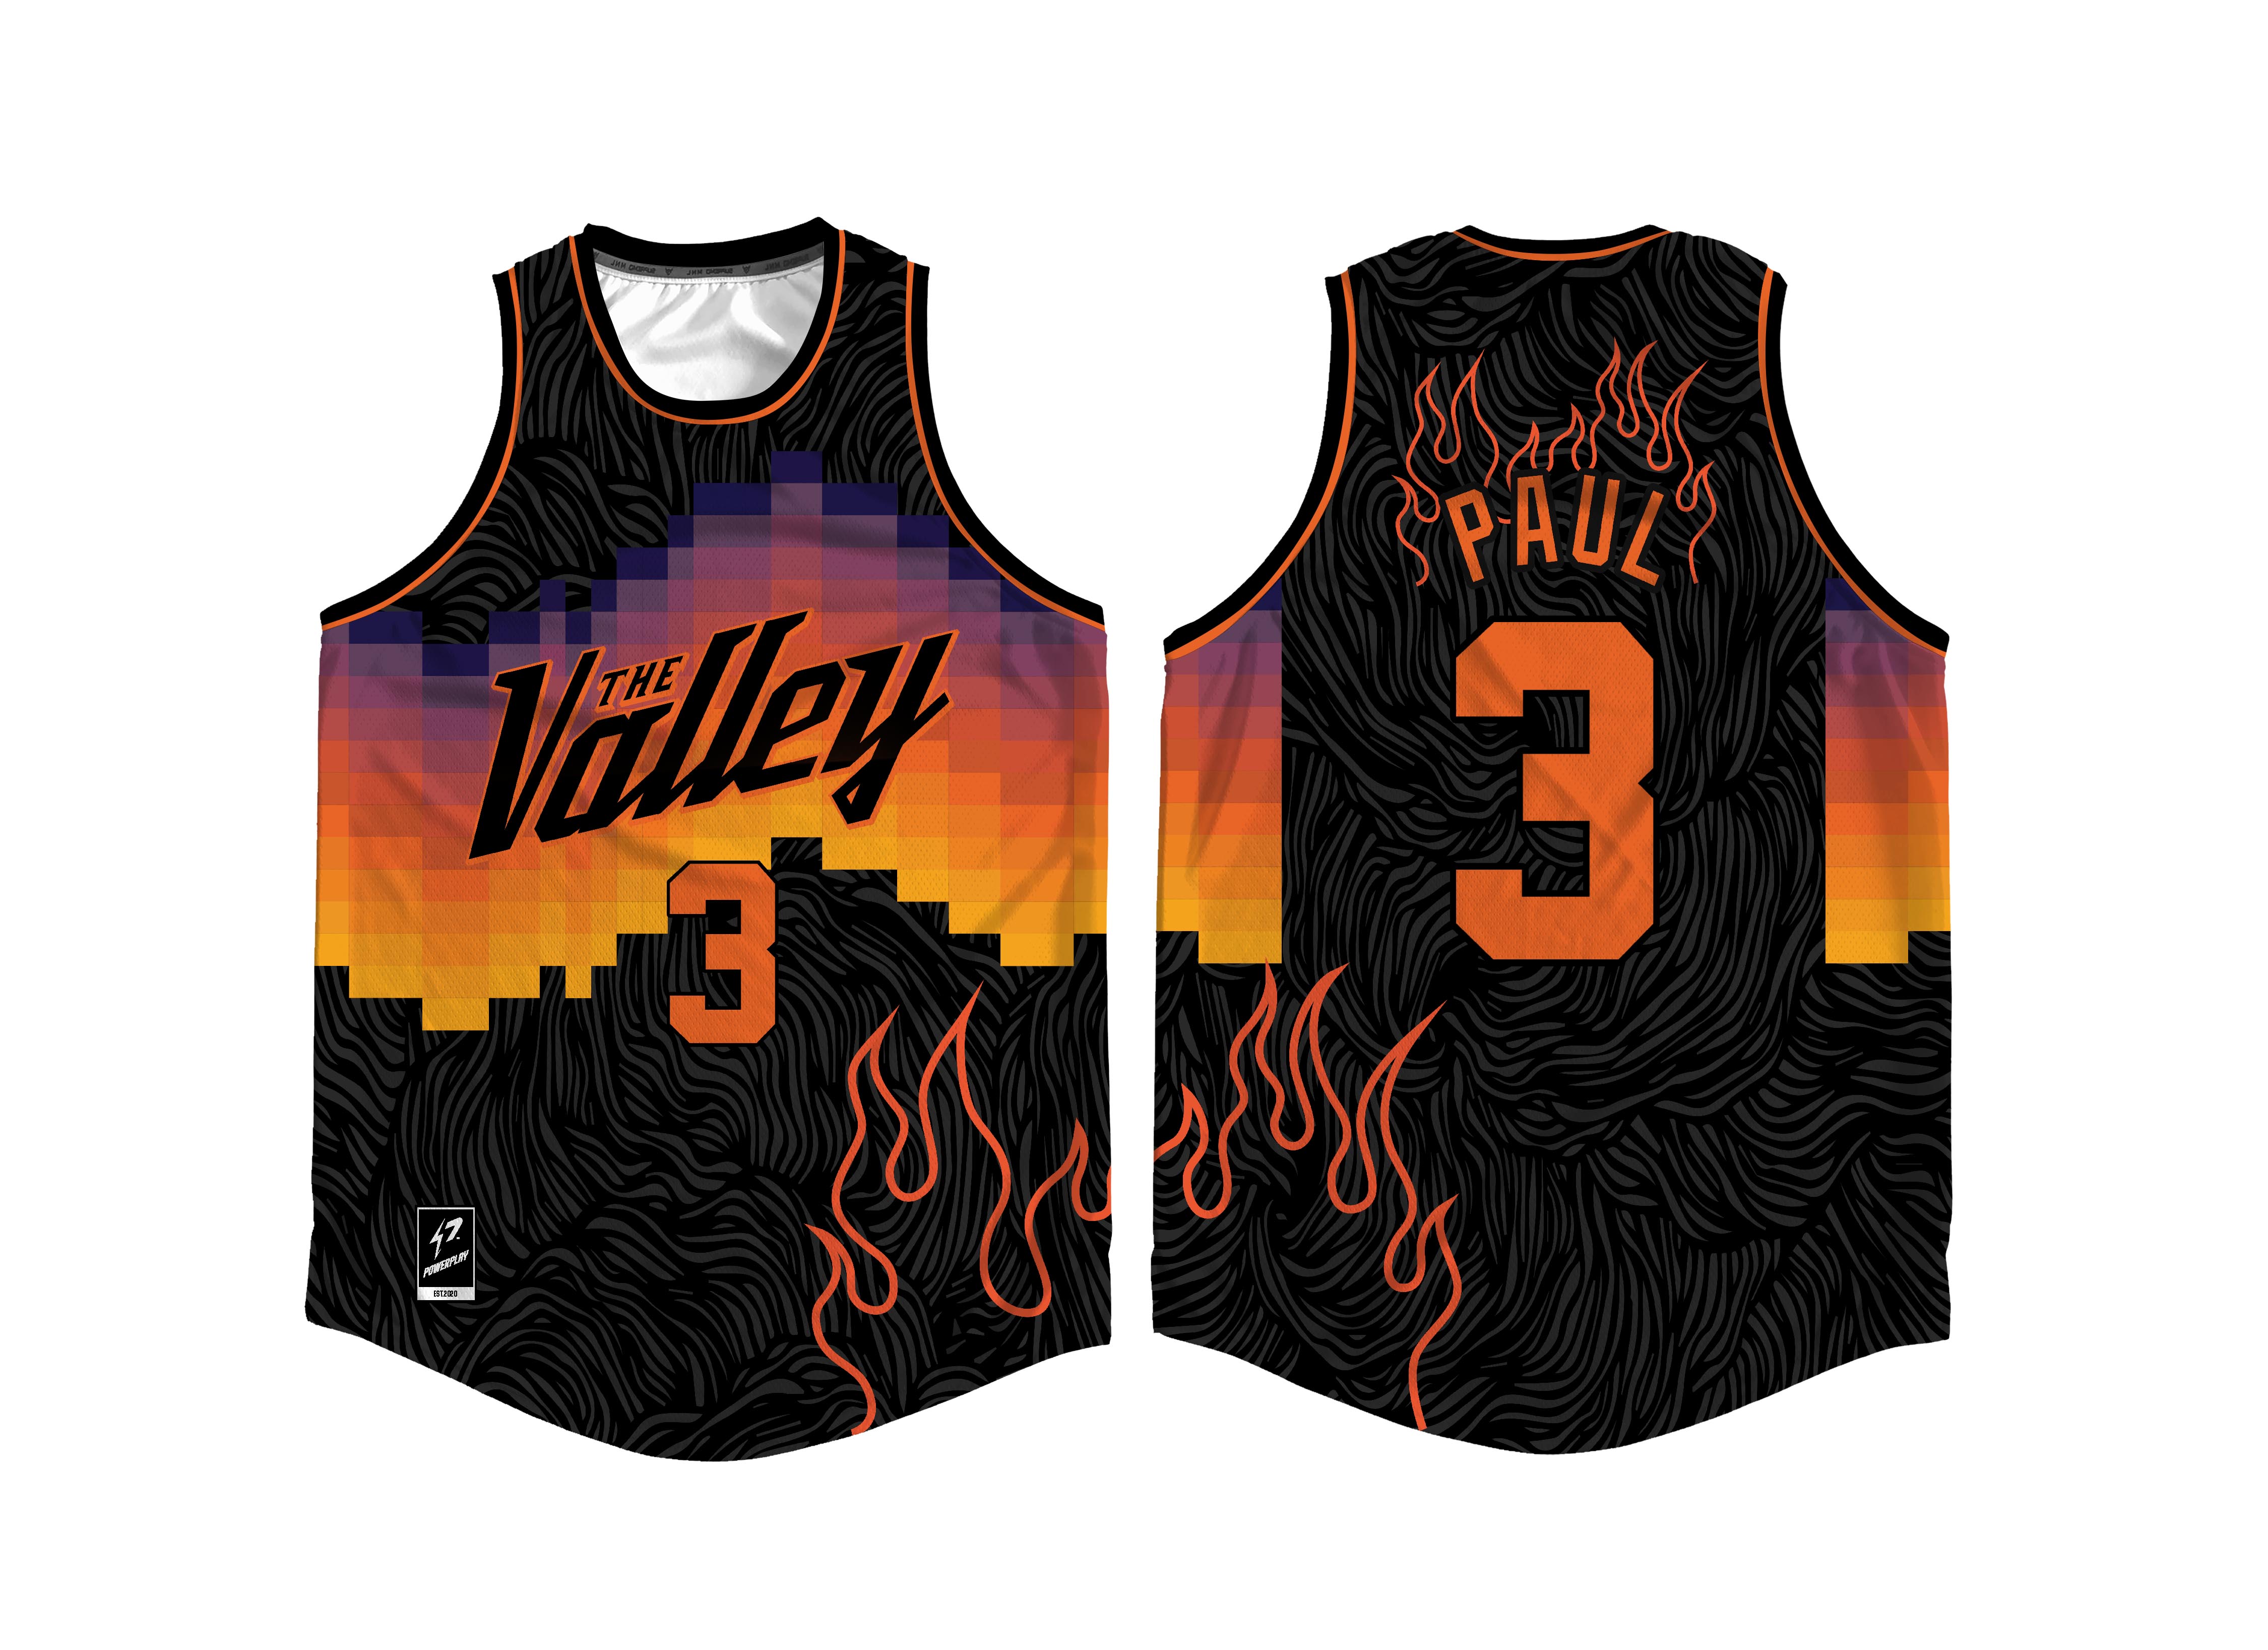 THE VALLEY CHRIS PAUL JERSEY